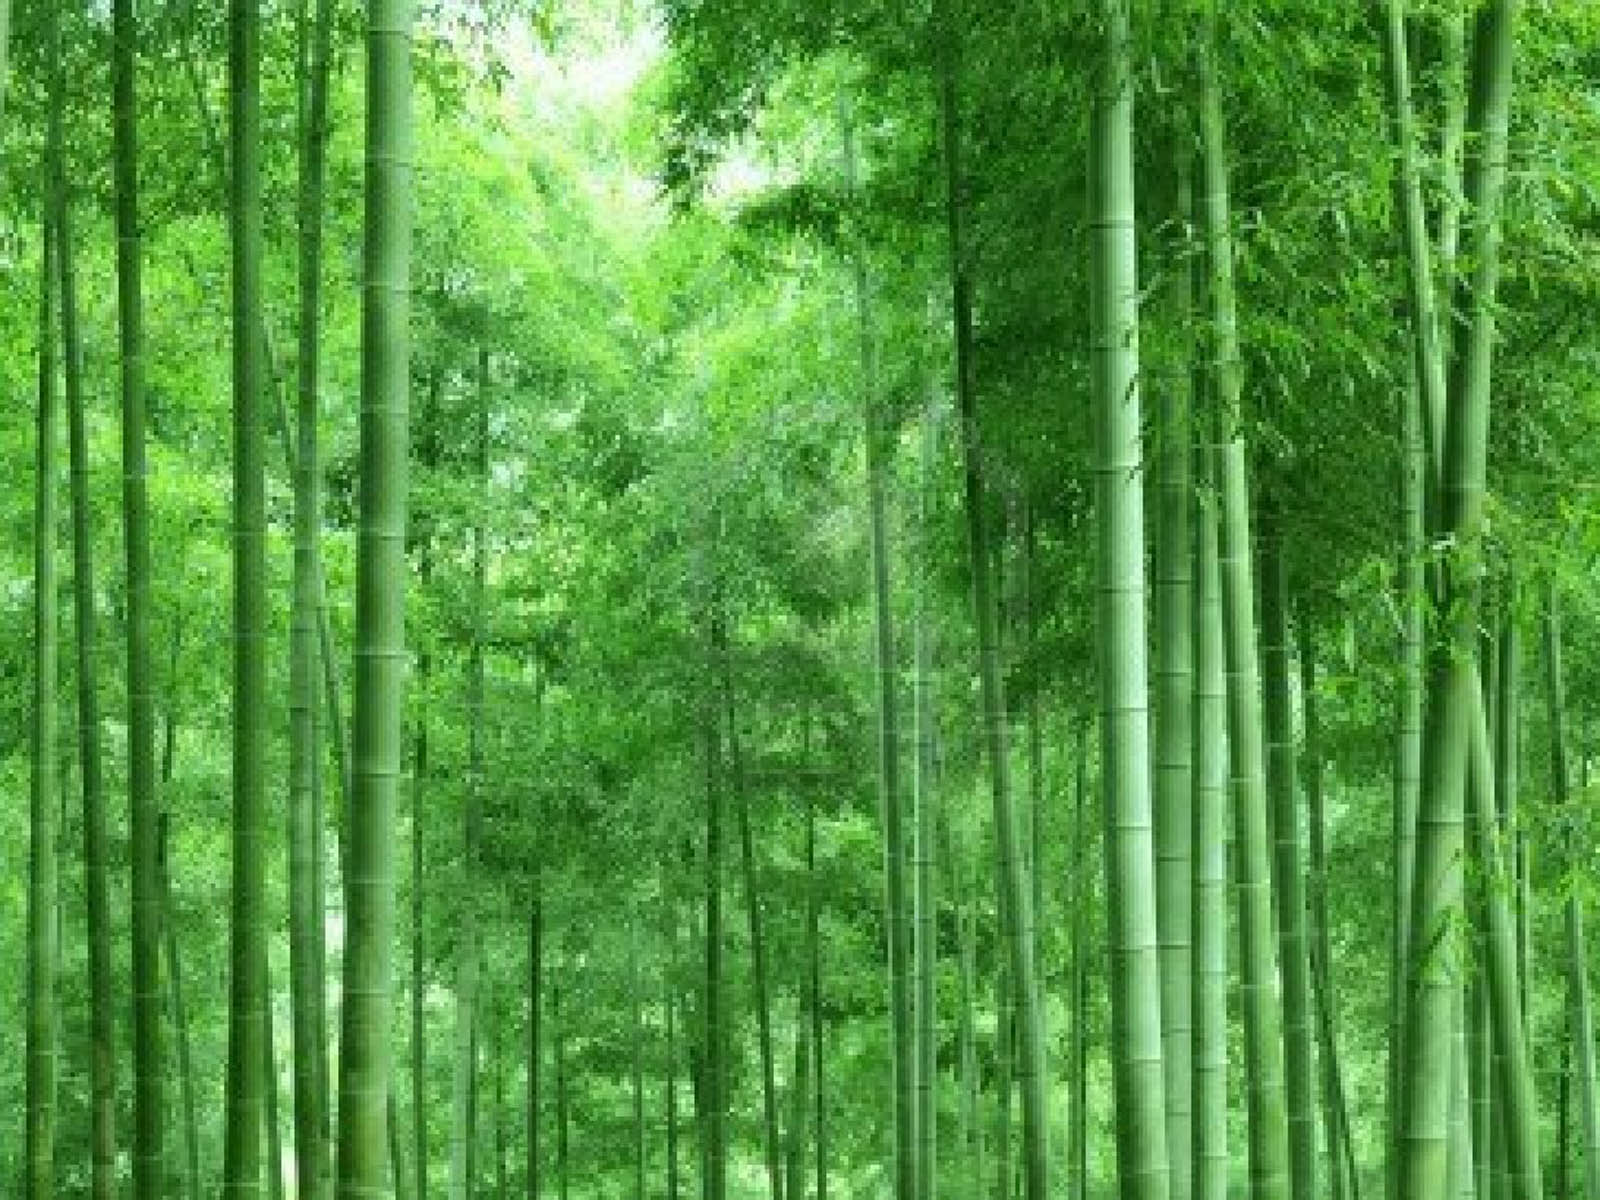 Tag Bamboo Forest Wallpaper Image Paos Pictures And Background